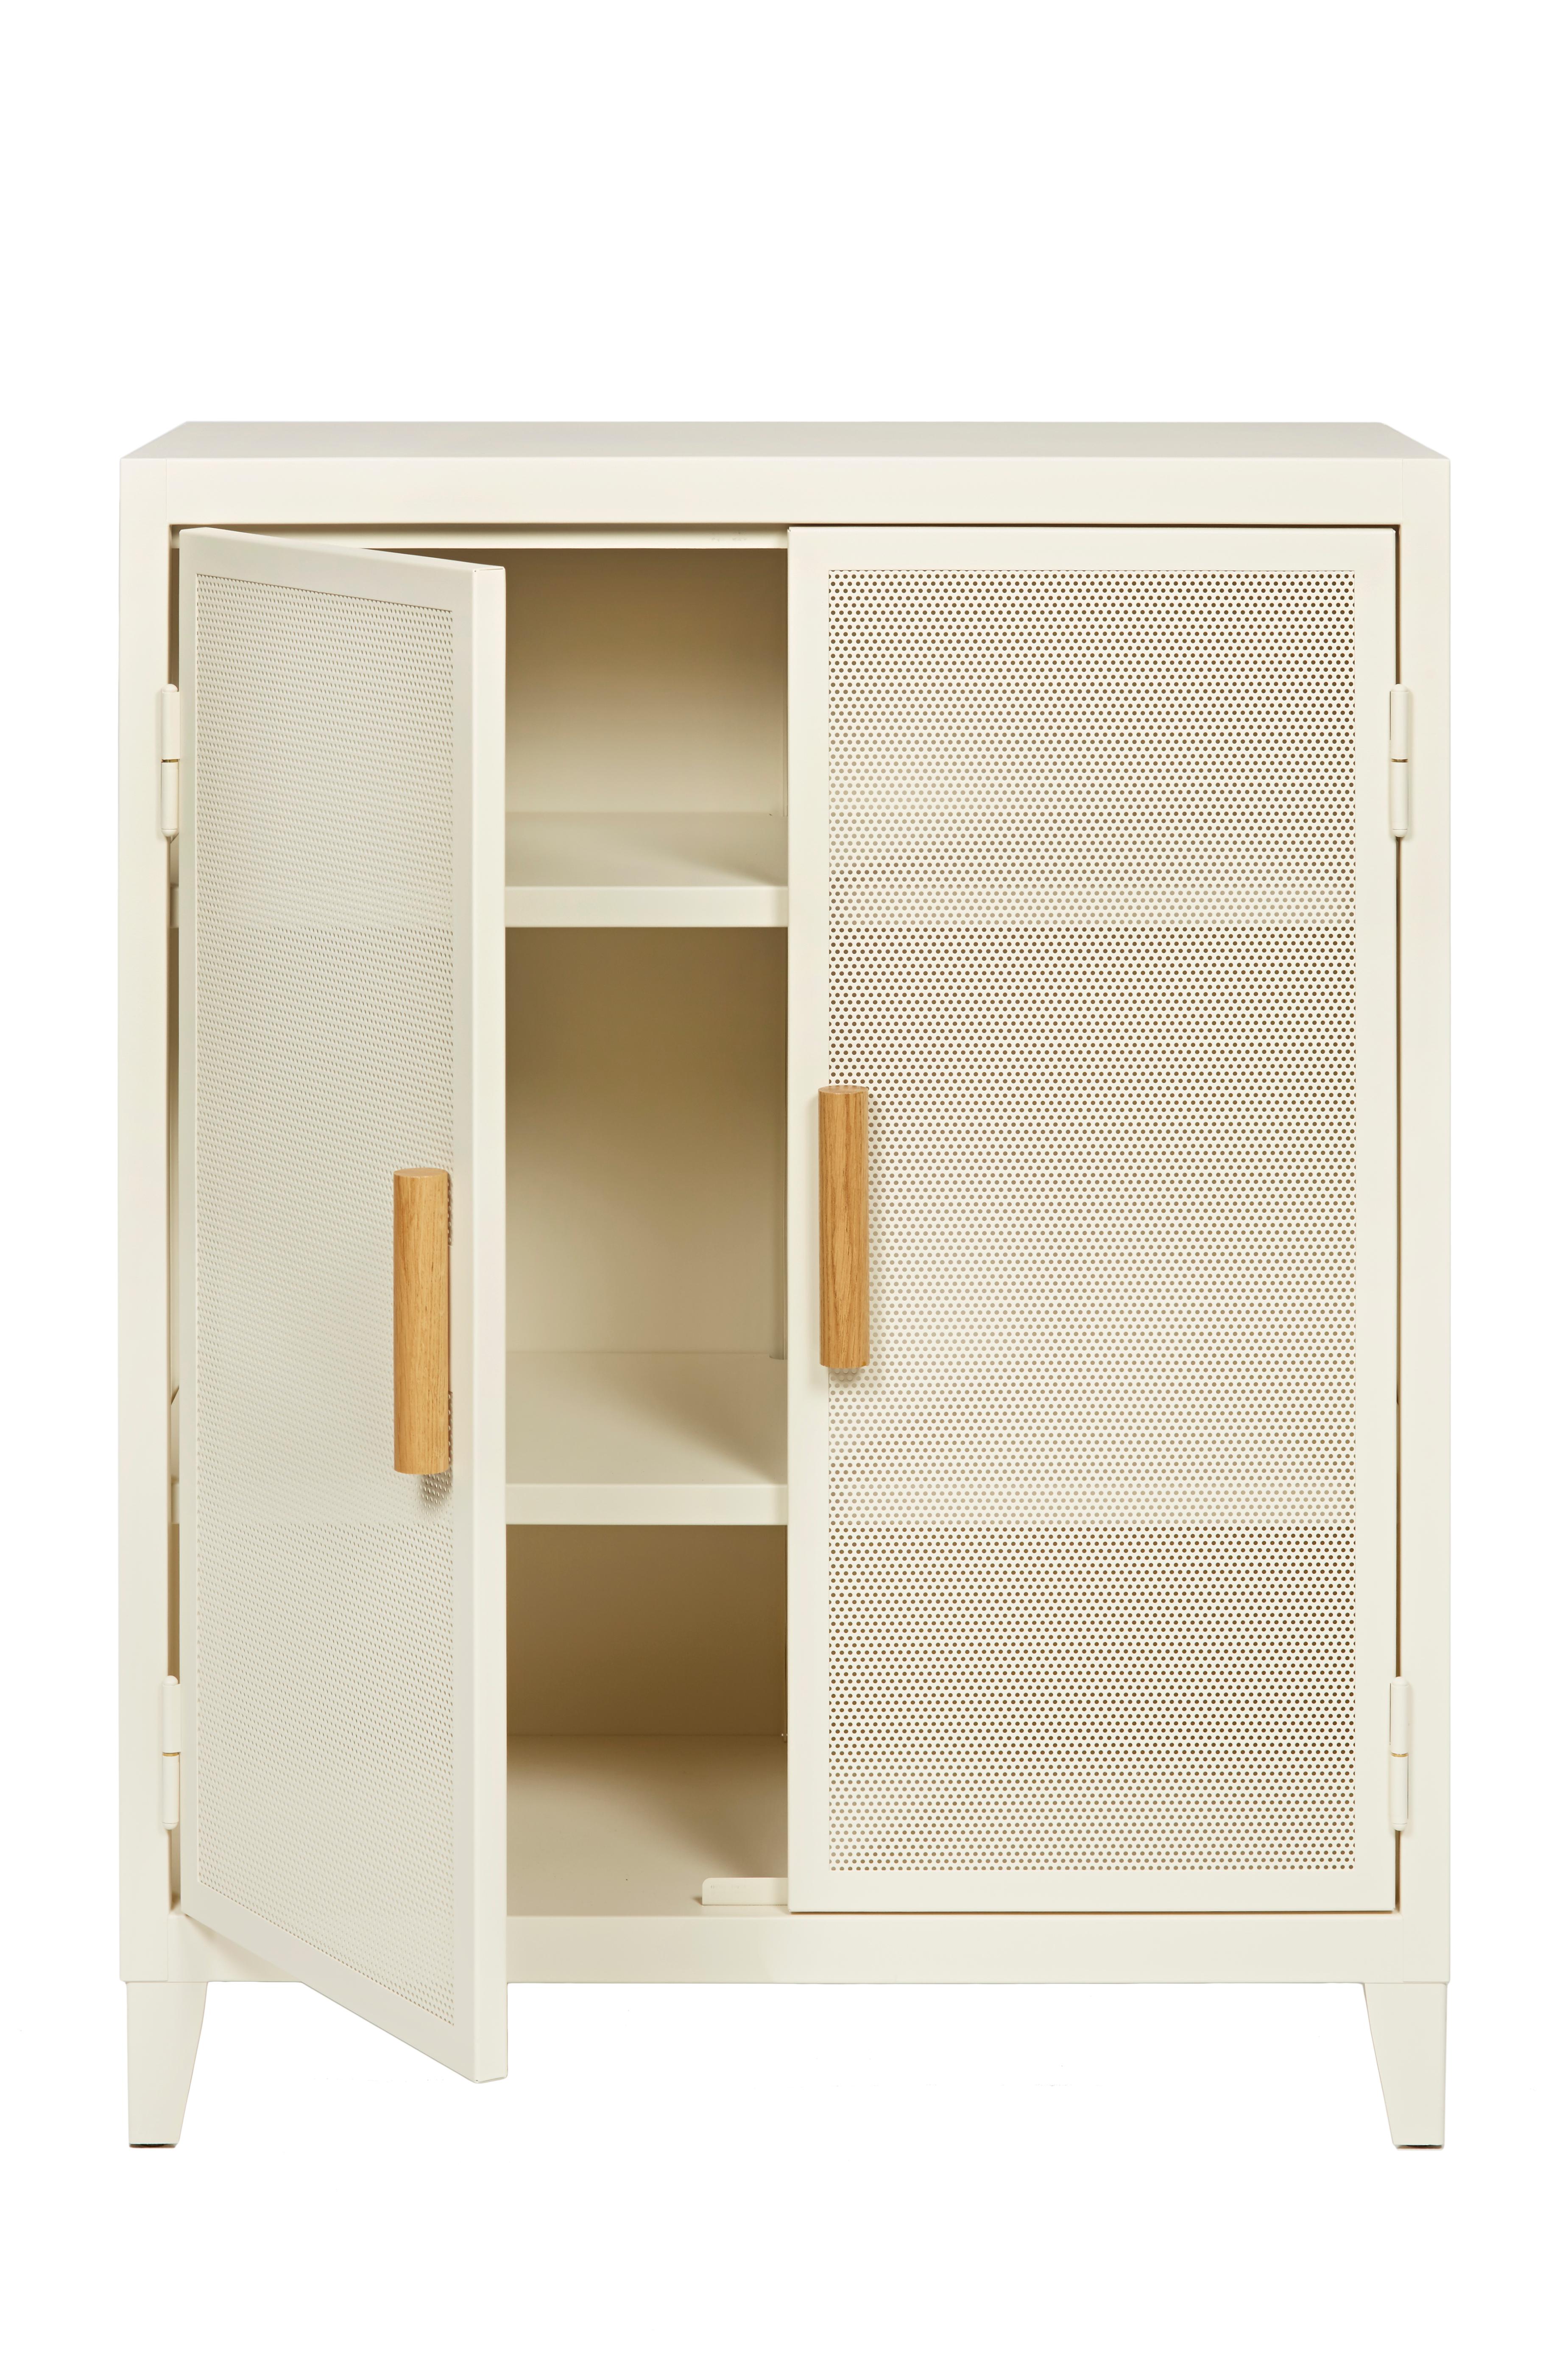 For Sale: White (Ivoire) B2 Perforated Low Locker in Essential Colors by Chantal Andriot and Tolix 4